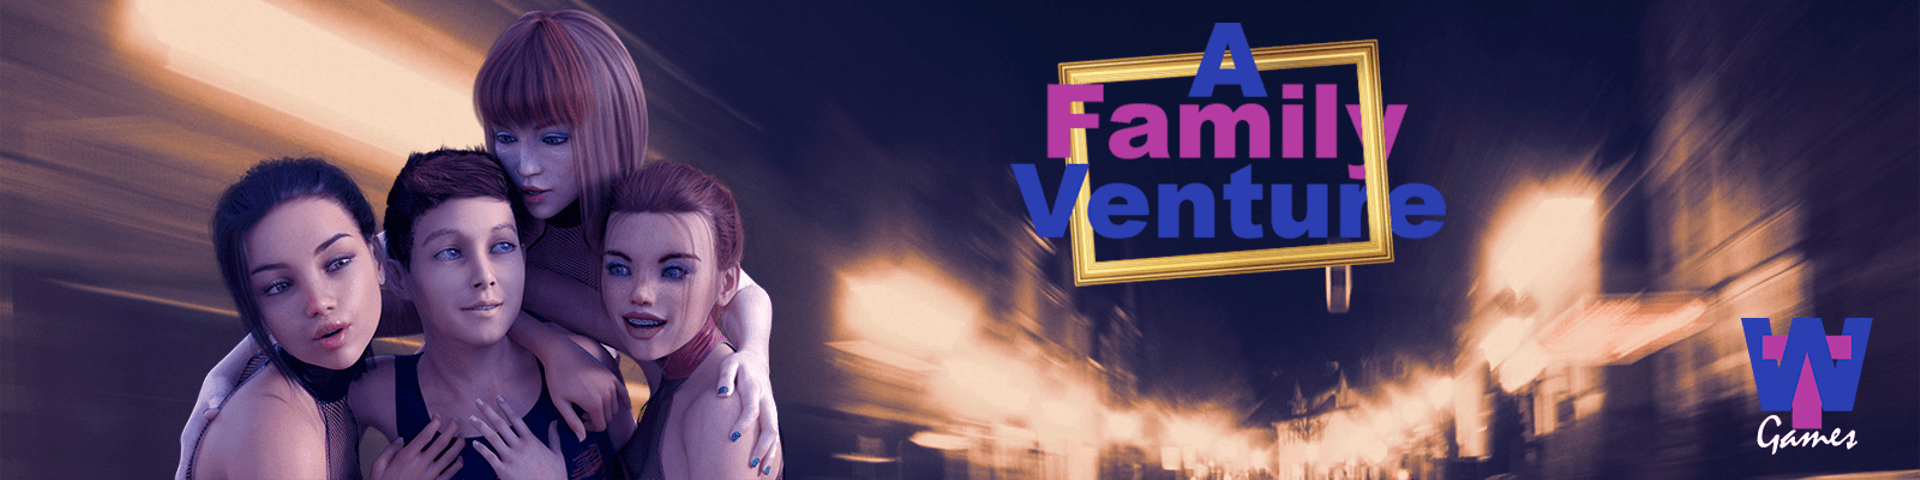 A Family Venture – Version 0.05b - Patreon incest adult game 3